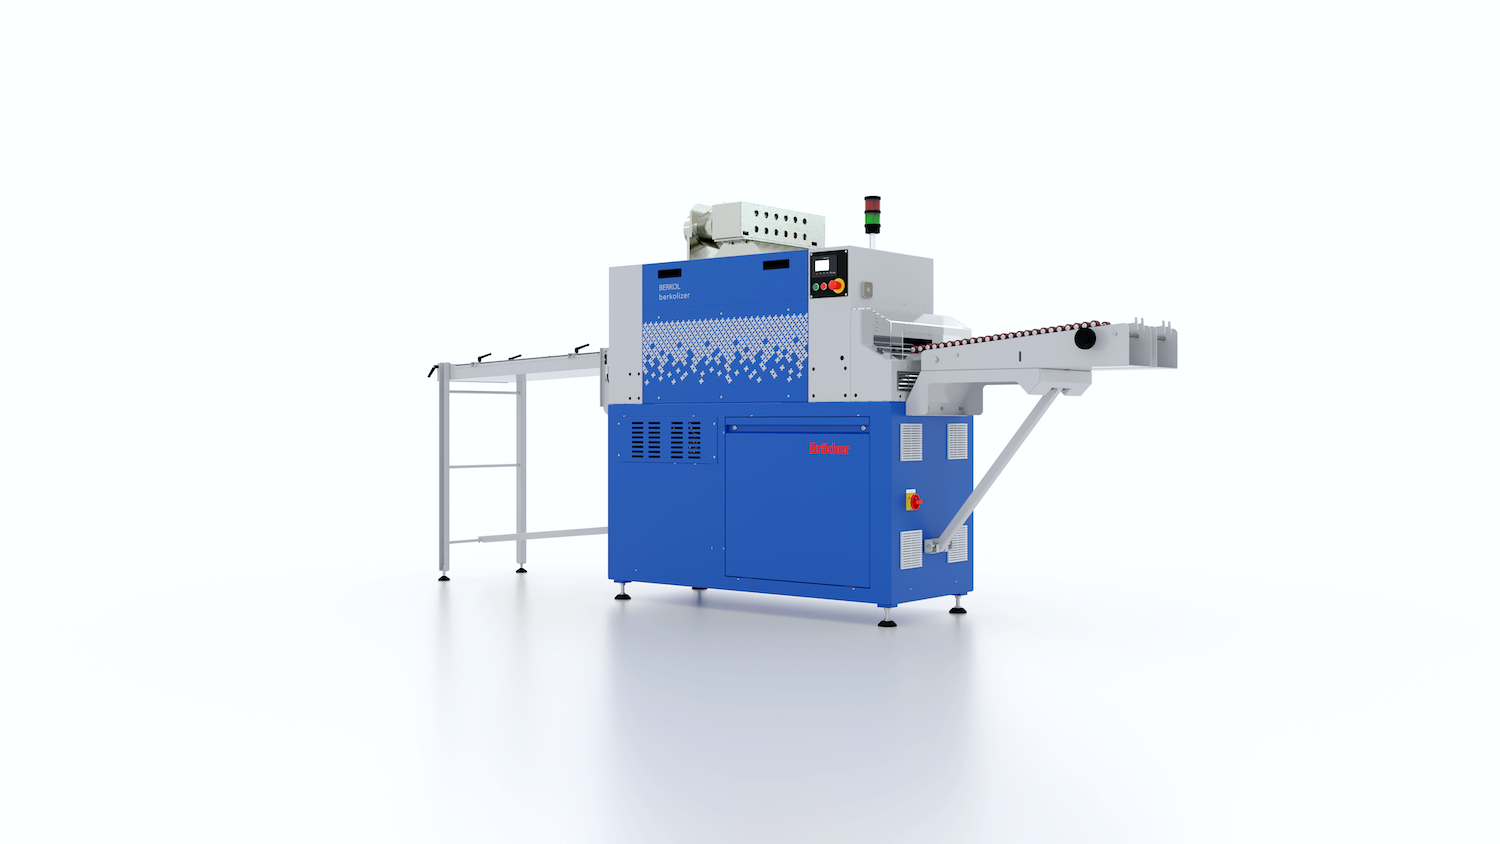 Berkolizer pro introduces easily adjustable UV treatment as industry-first. © Rieter